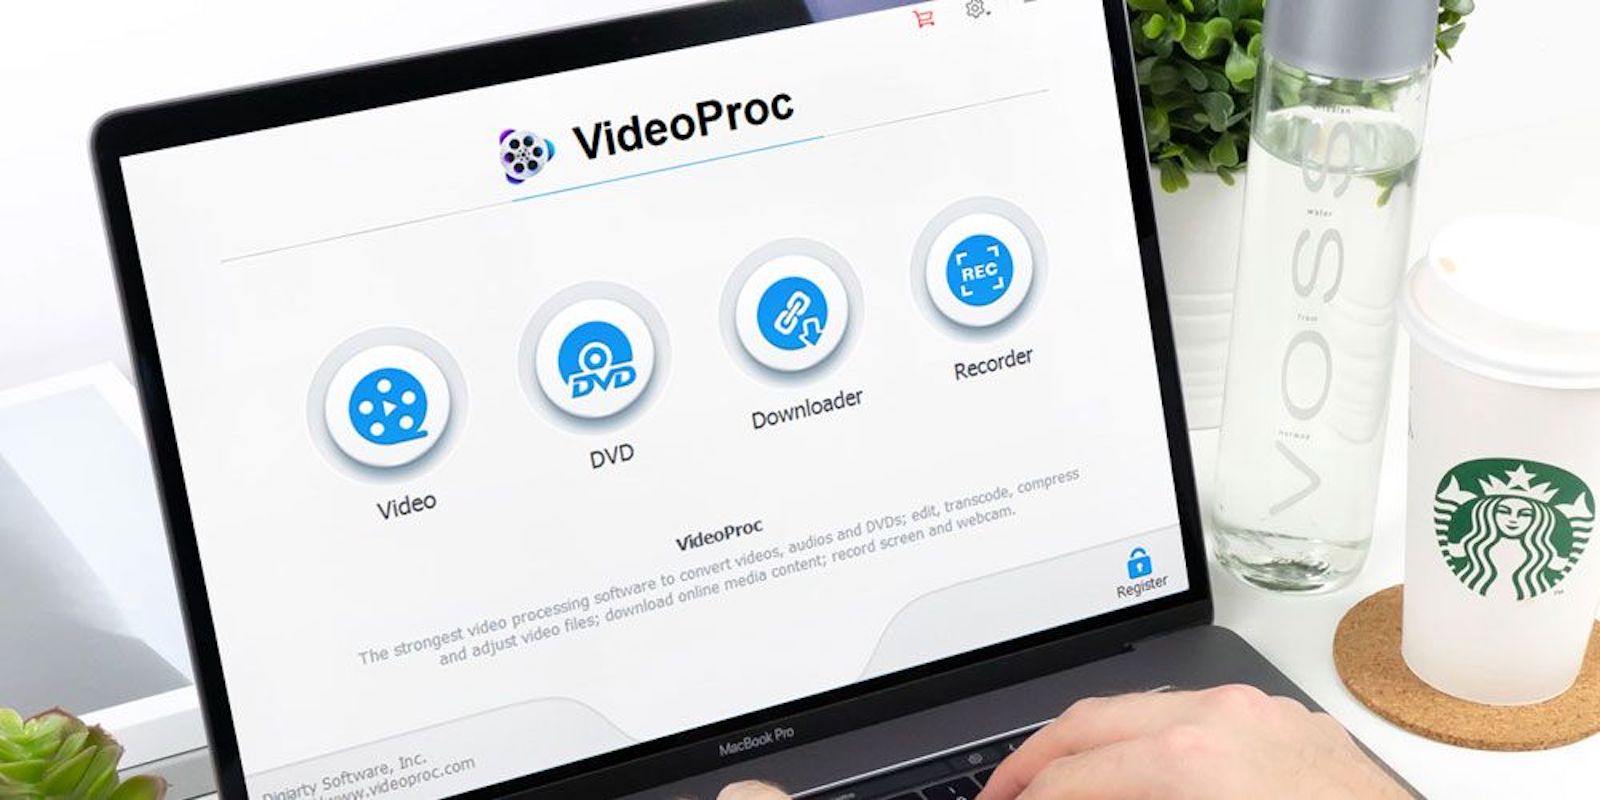 VideoProc makes it easy to download, edit and convert video for perfect playback on any device.